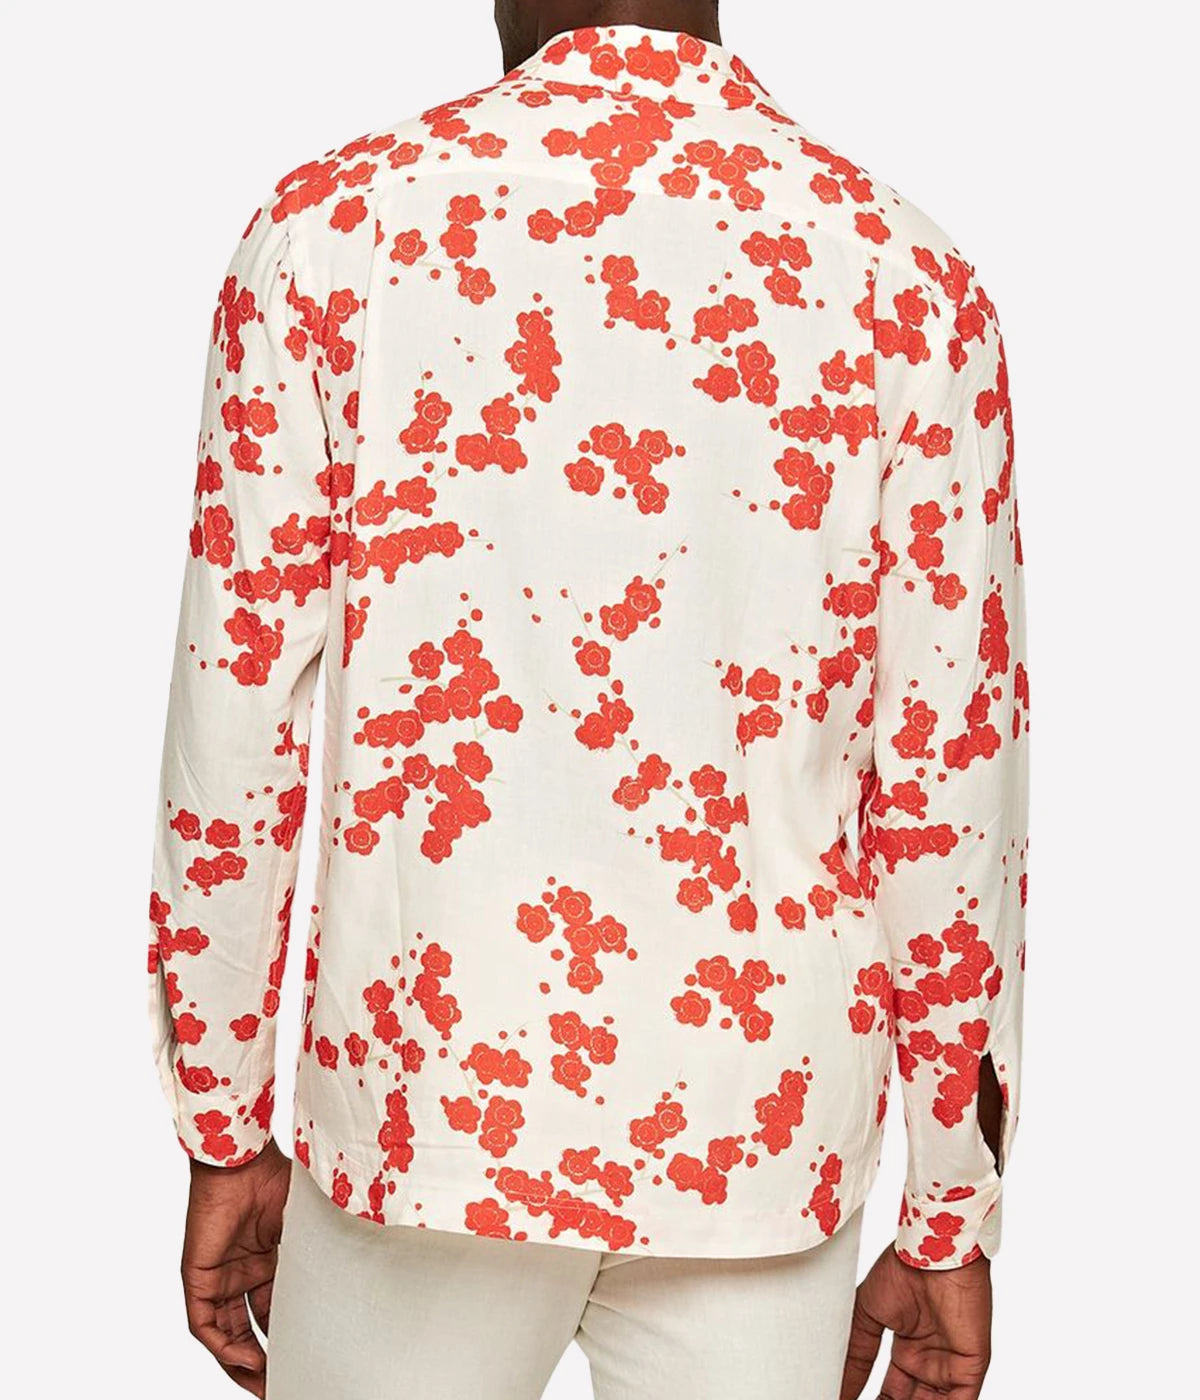 Ridley Plum Blossom T-Shirt in Red